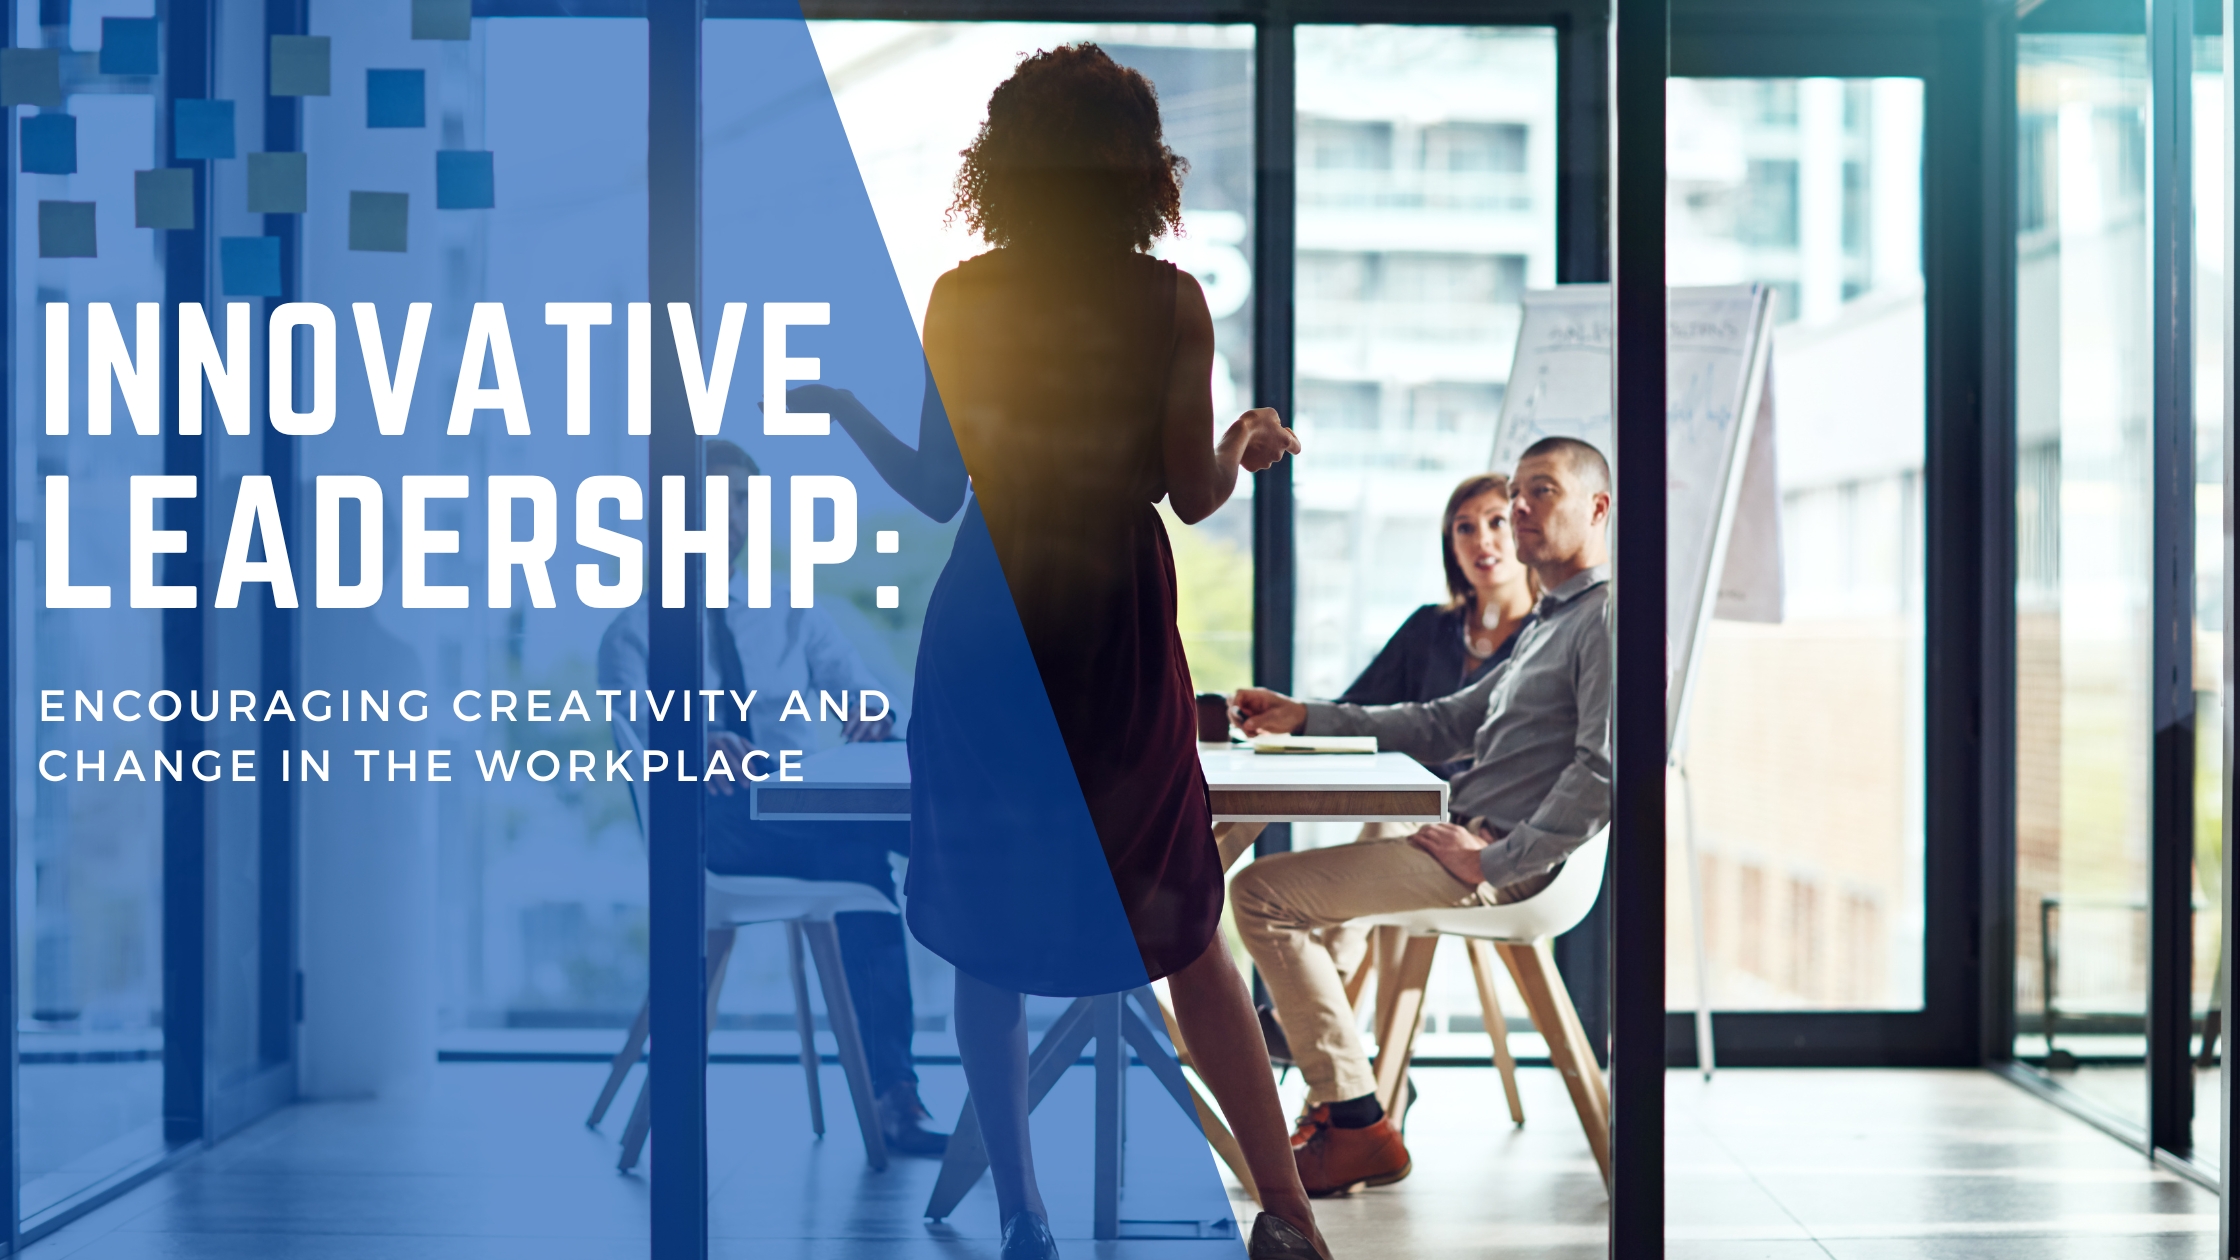 Innovative Leadership: Encouraging Creativity and Change in the Workplace